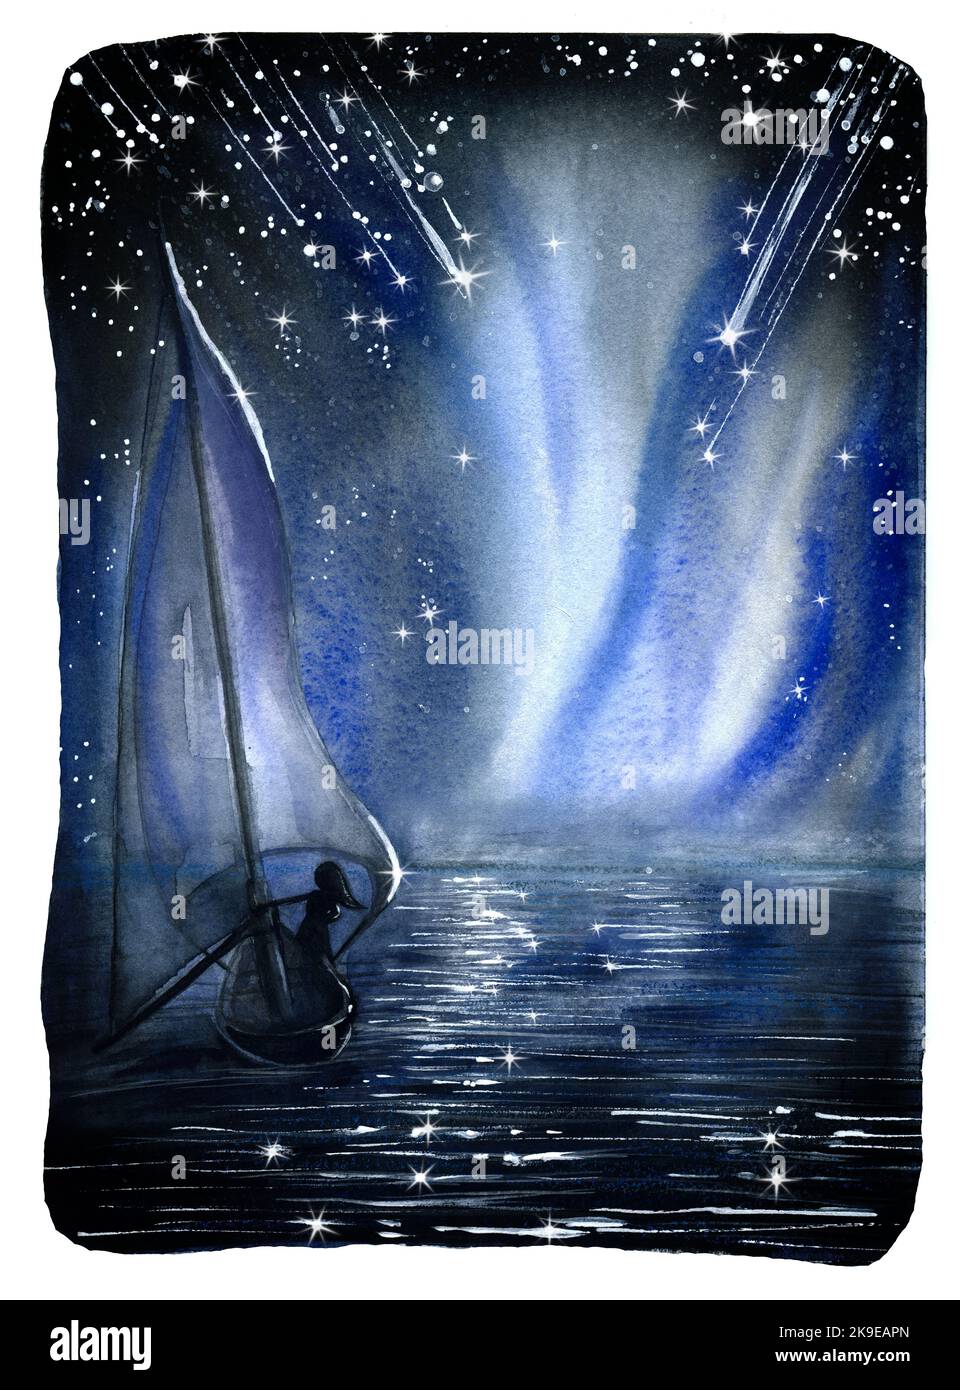 A sailboat with a girl floats on the sea at night against the backdrop of the night starry sky. Stock Photo